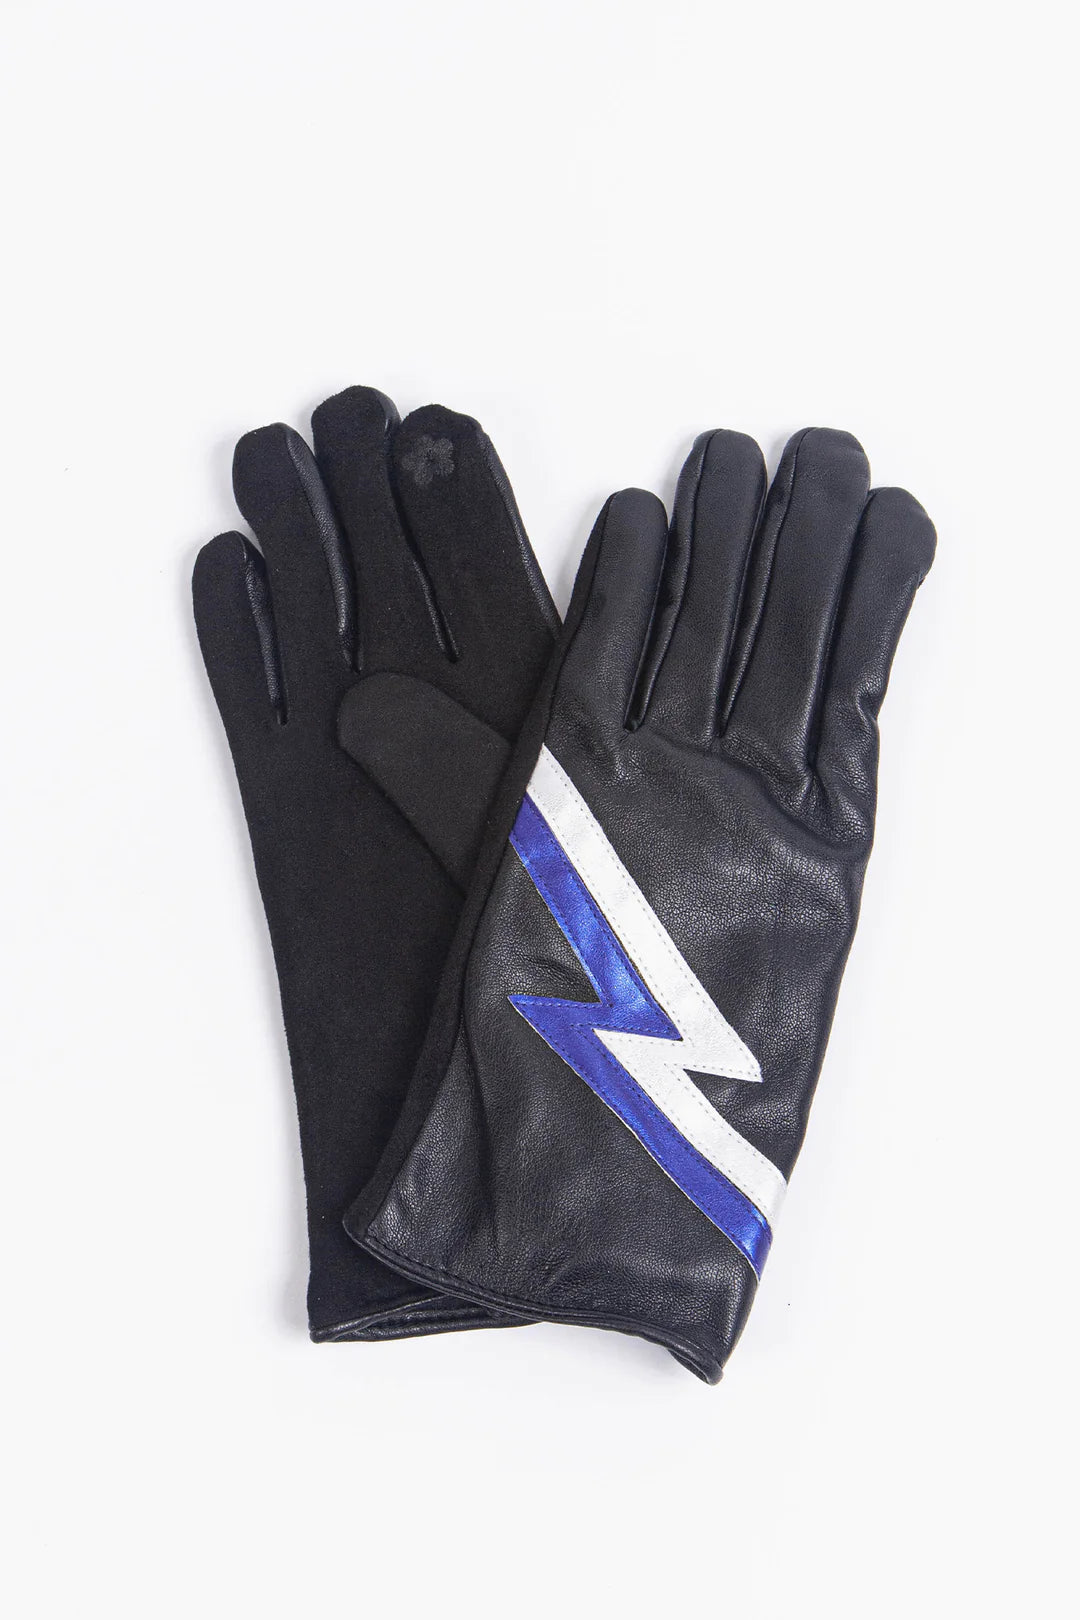 Black Faux Leather Gloves With Metallic Blue Lightning Bolt